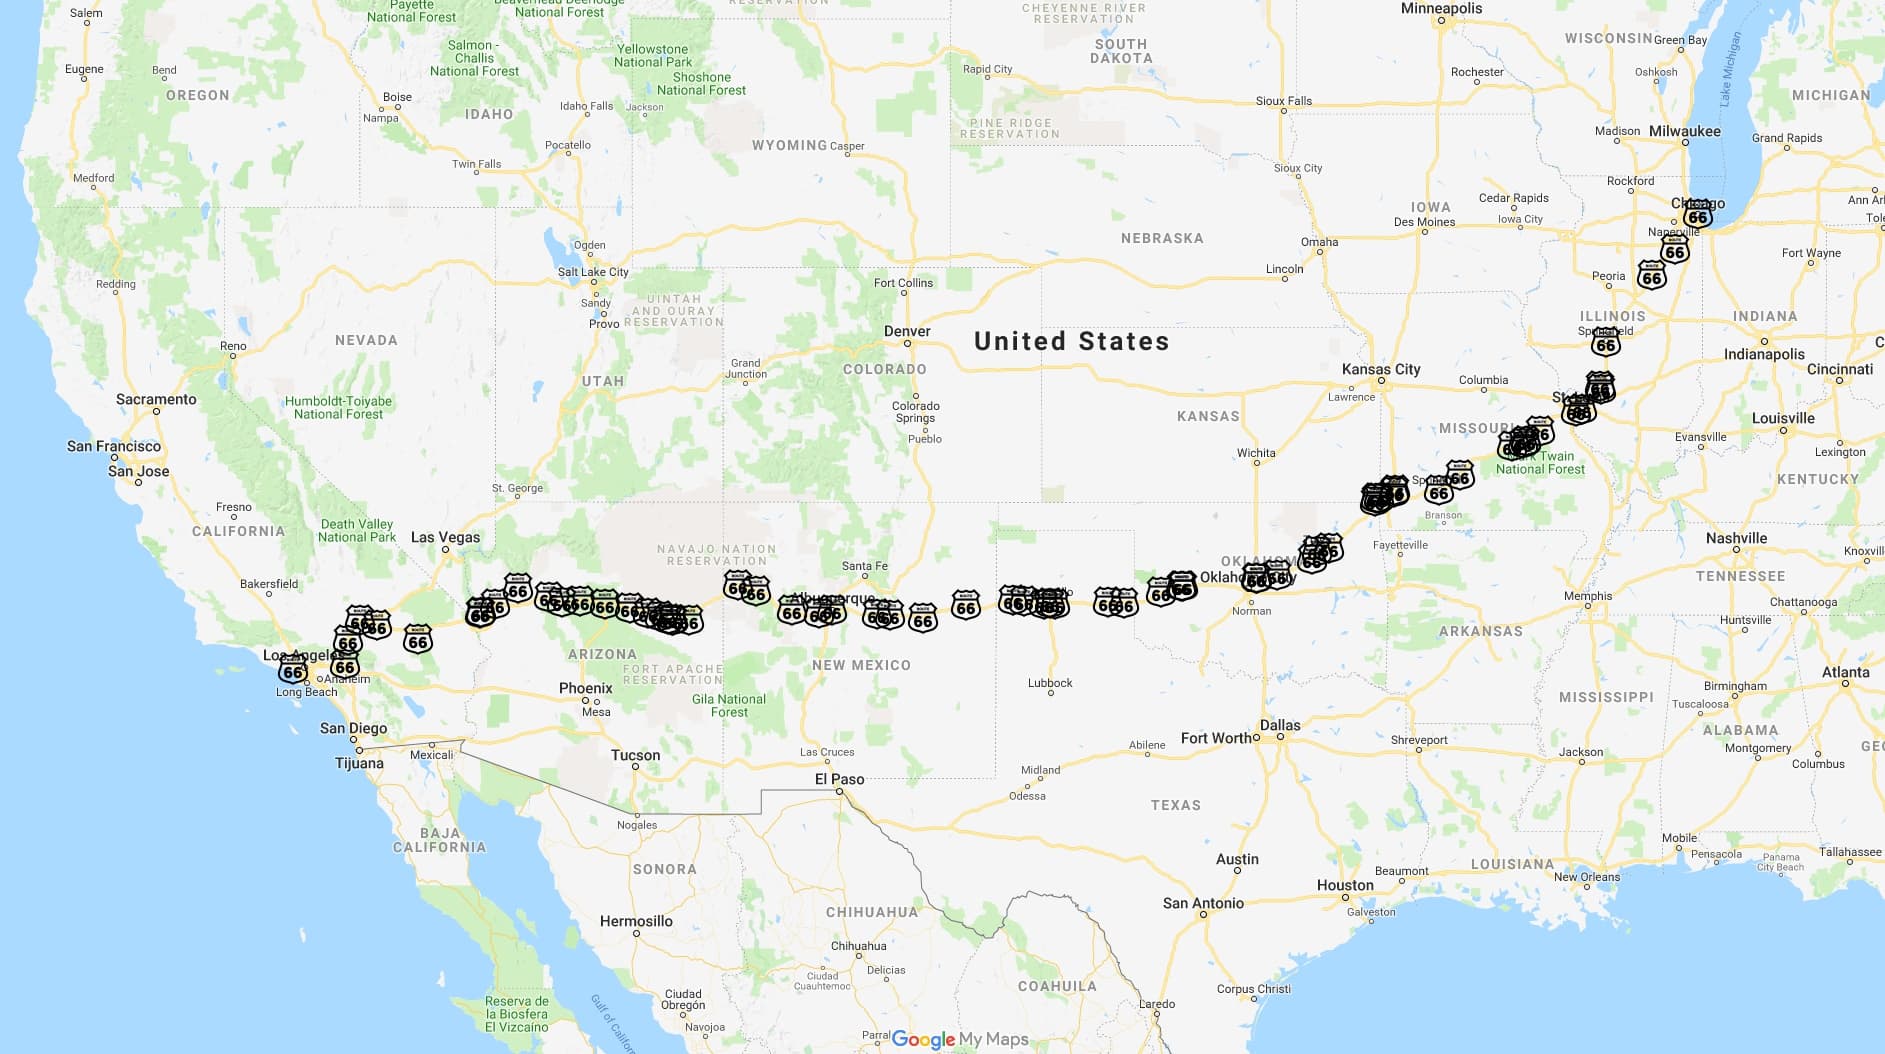 Route 66 itinerary map.